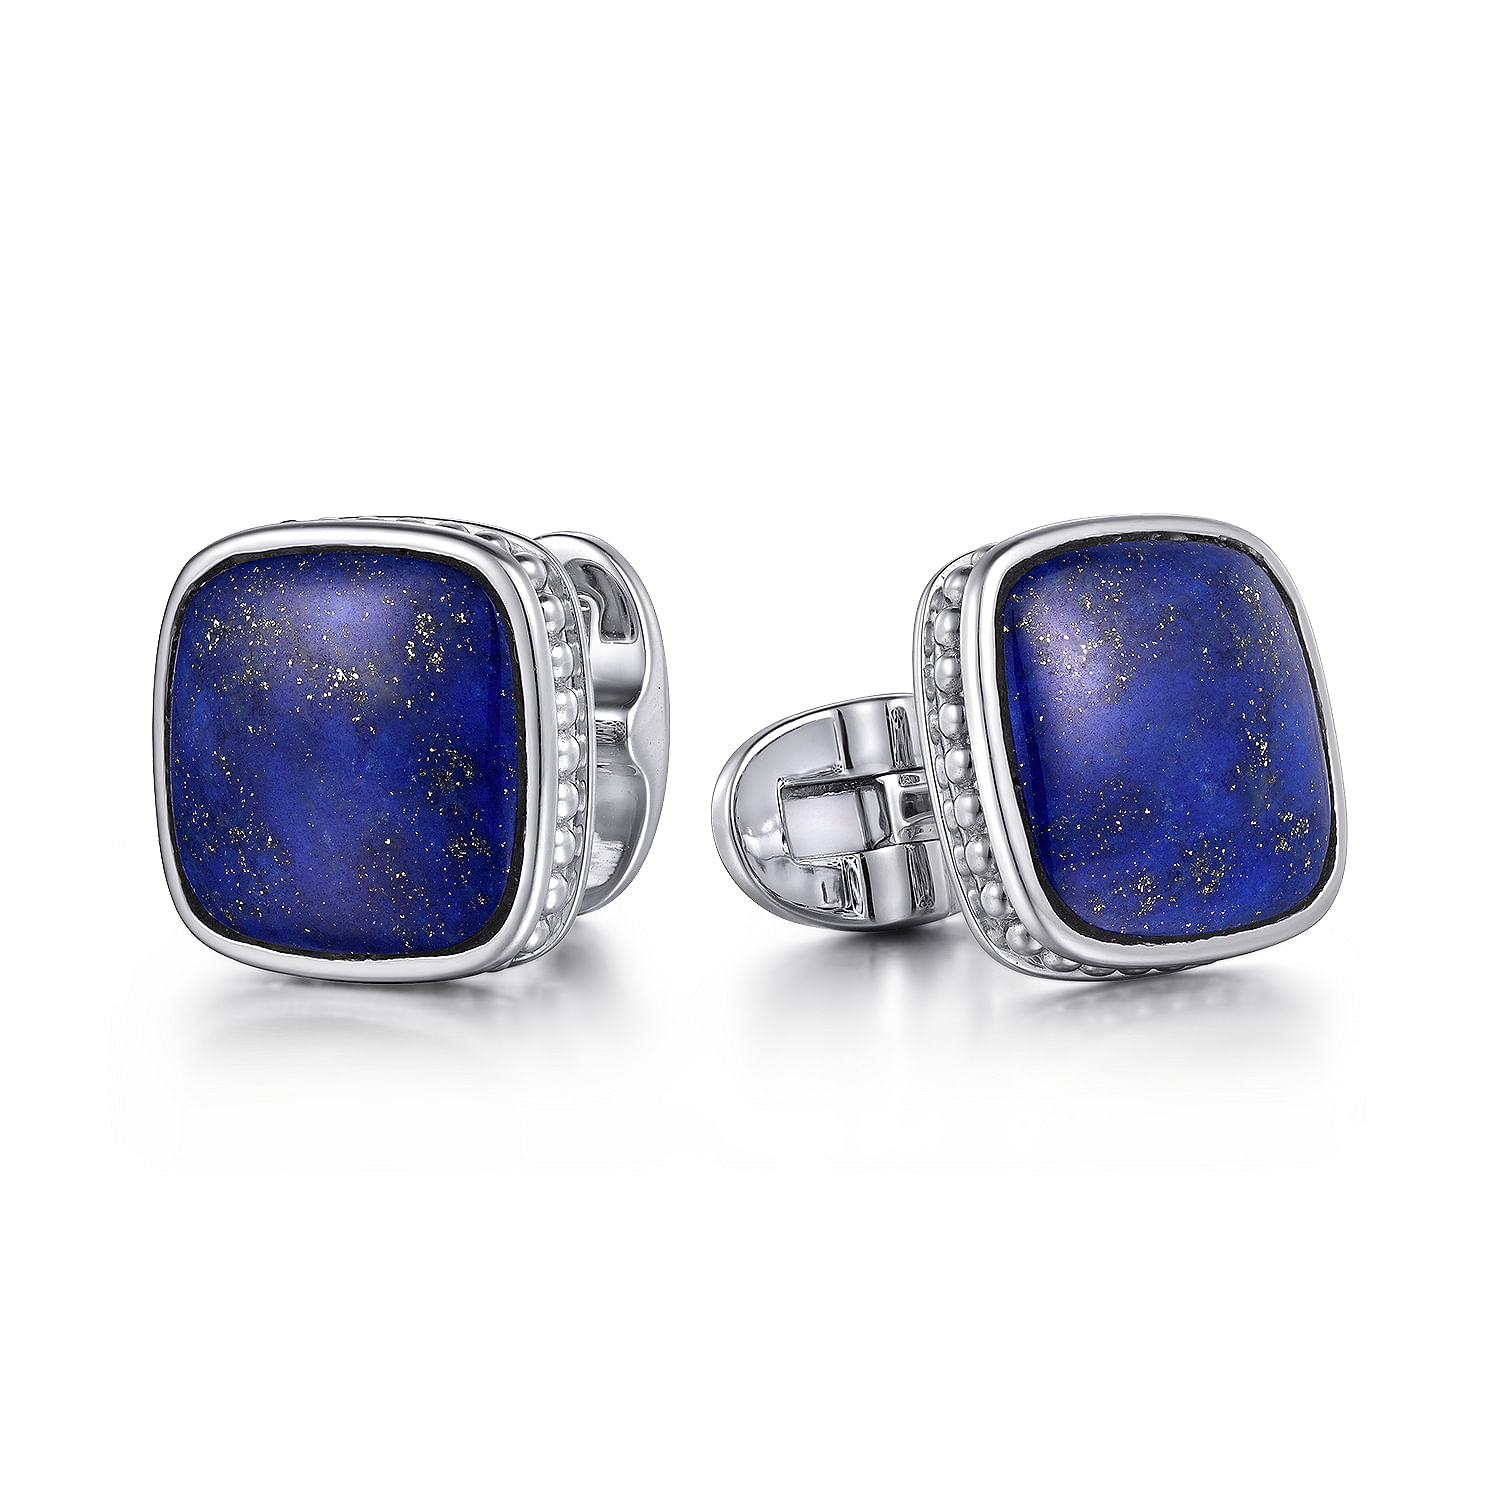 925 Sterling Silver Square Cufflinks with Lapis Stones